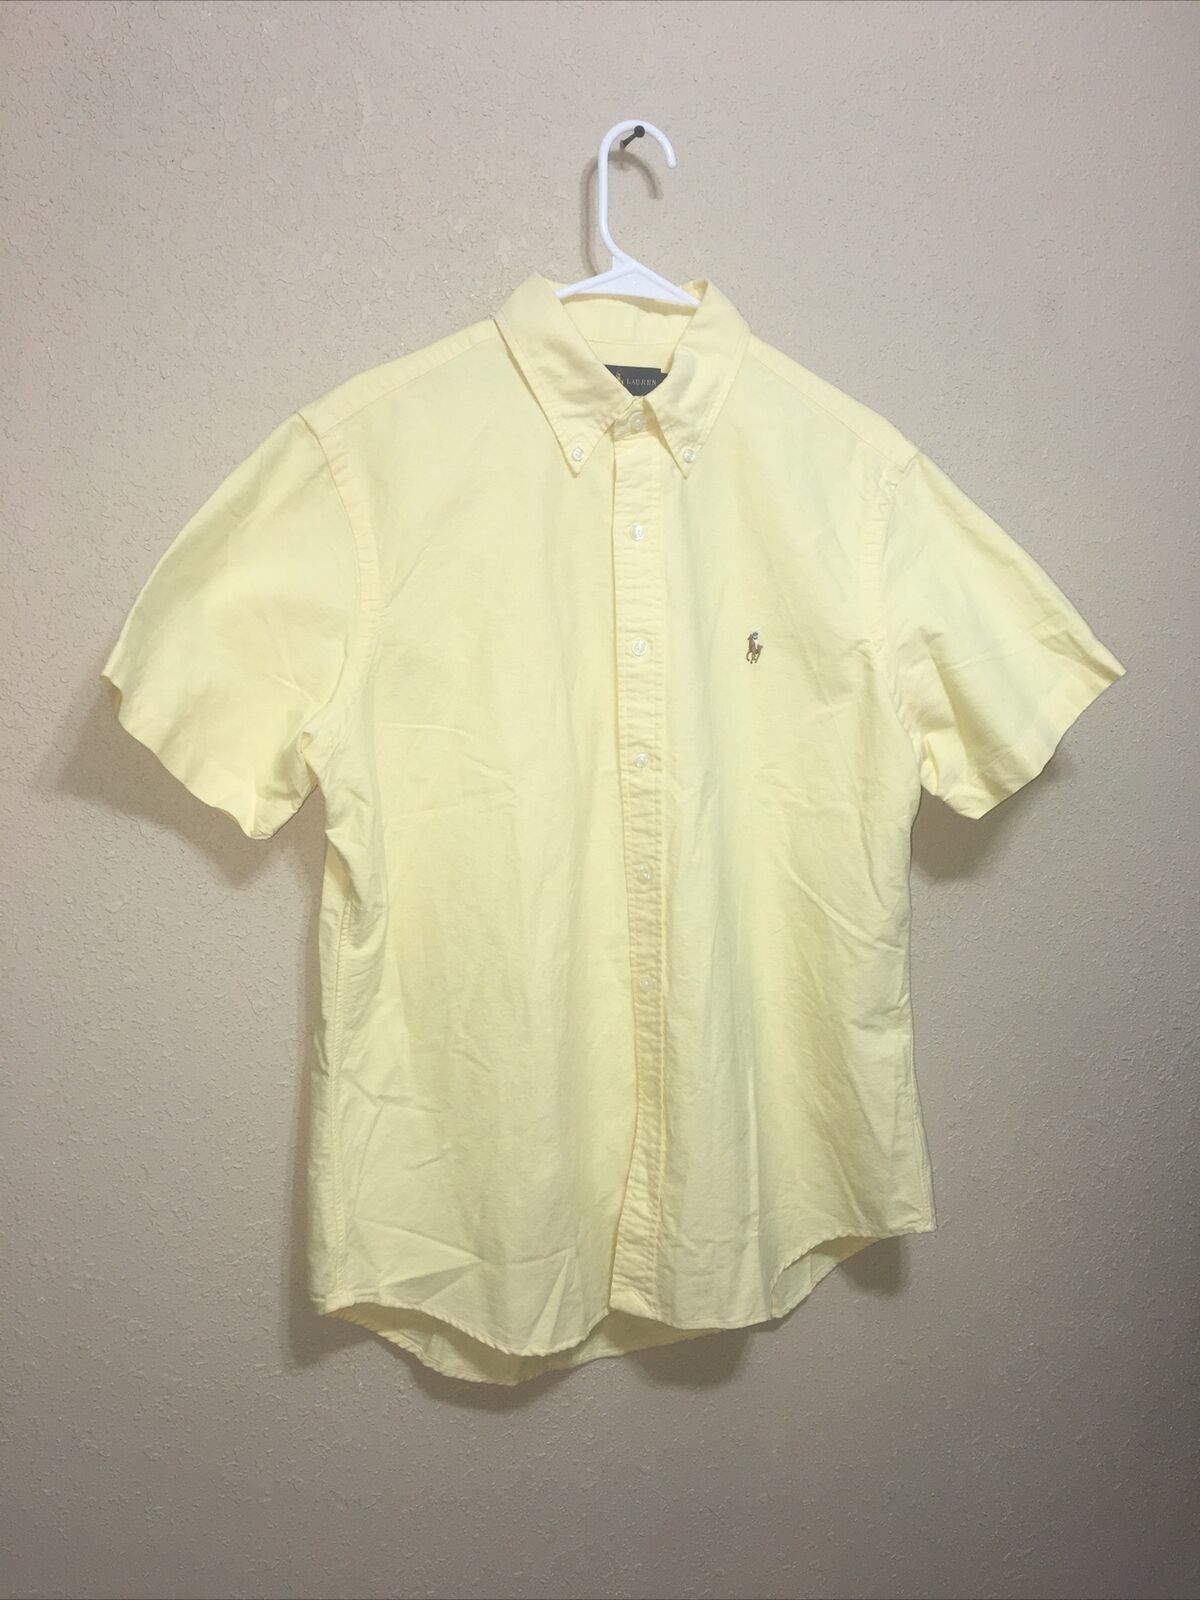 Primary image for Ralph Lauren Mens Shirt ClaSsic Fit Button Down Short SLV Shirt YELLOW SZ L NEW